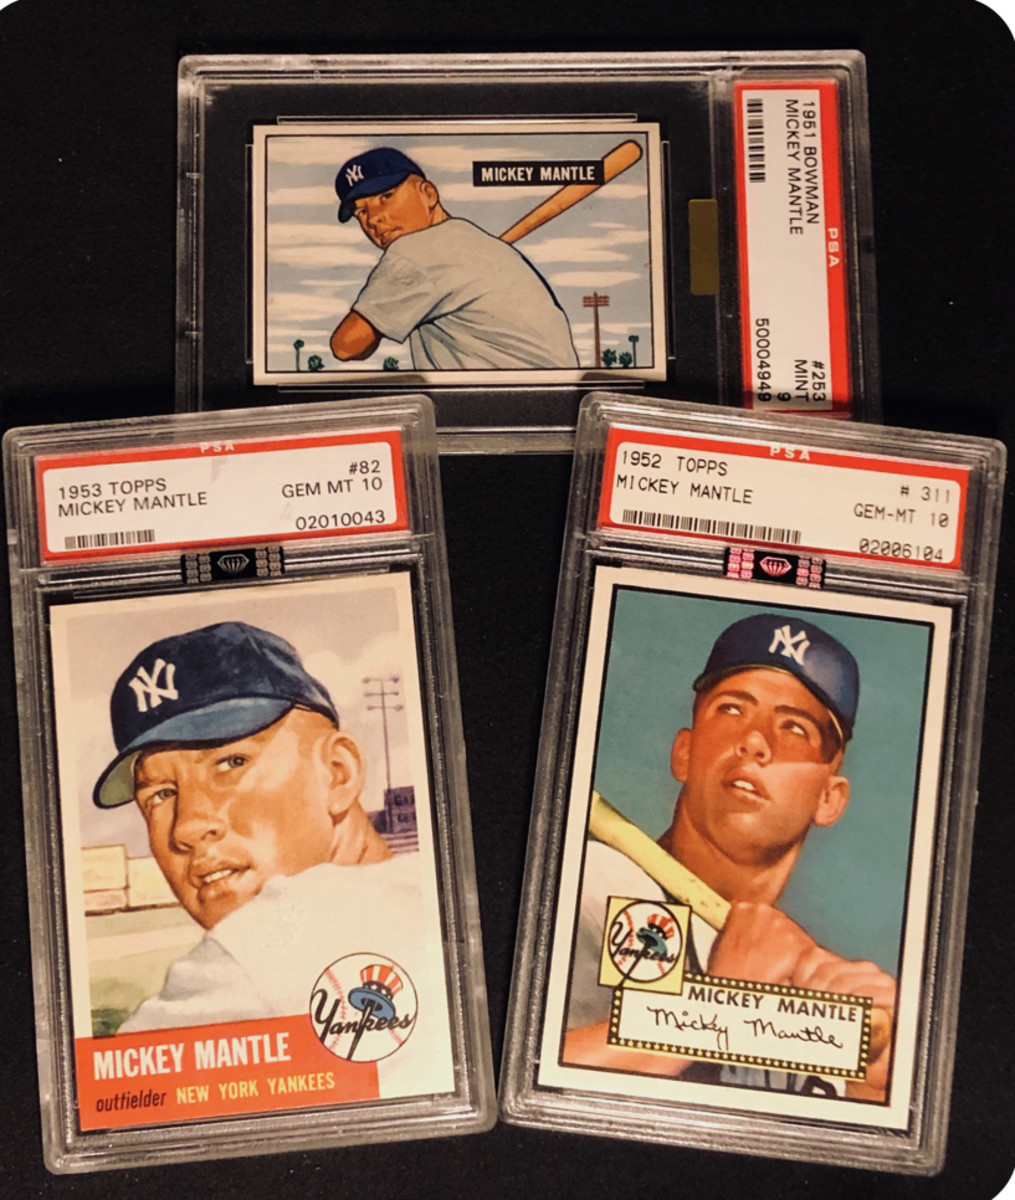 Marshall Fogel owns three of the most valuable Mickey Mantle cards in the hobby, including one of only three 1952 PSA 10s.